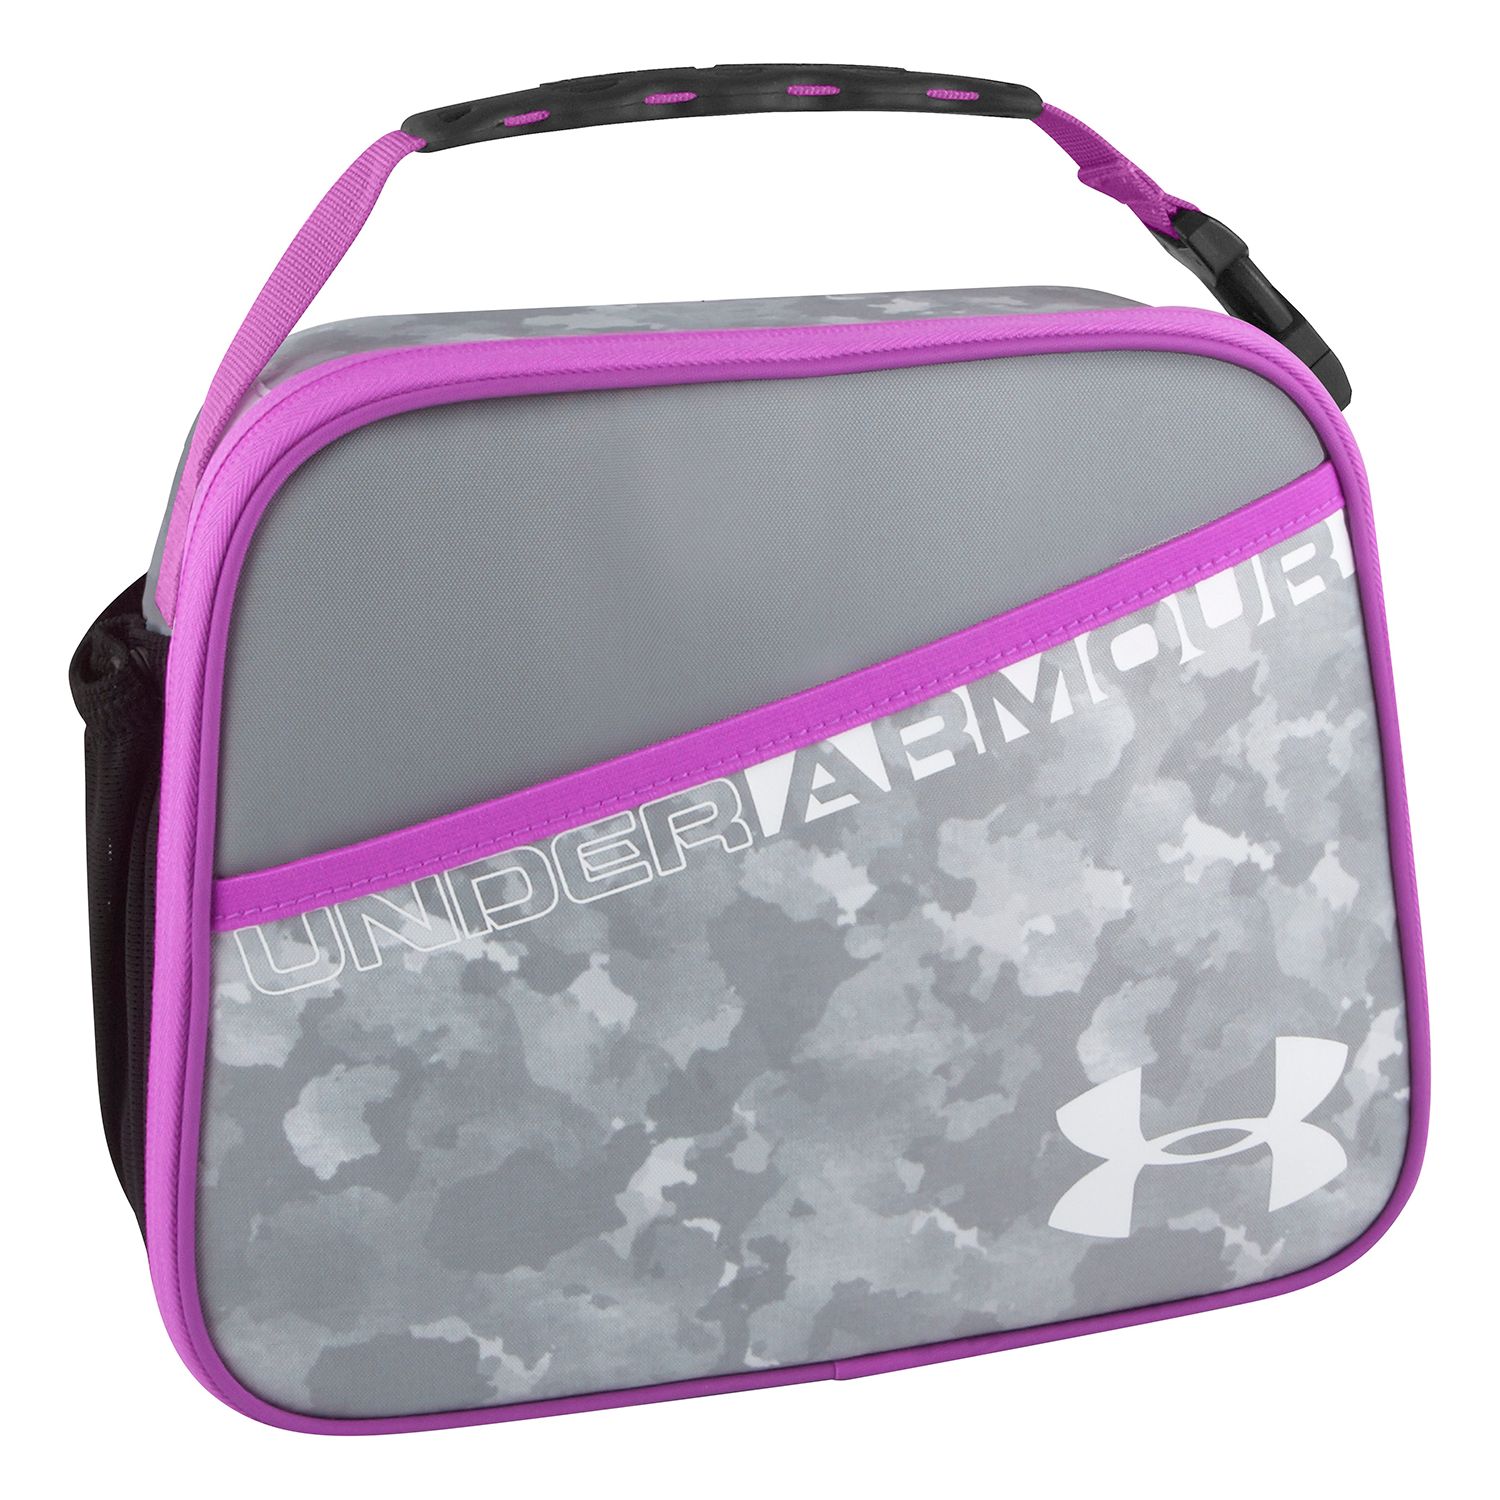 Girls Under Armour Lunch Box